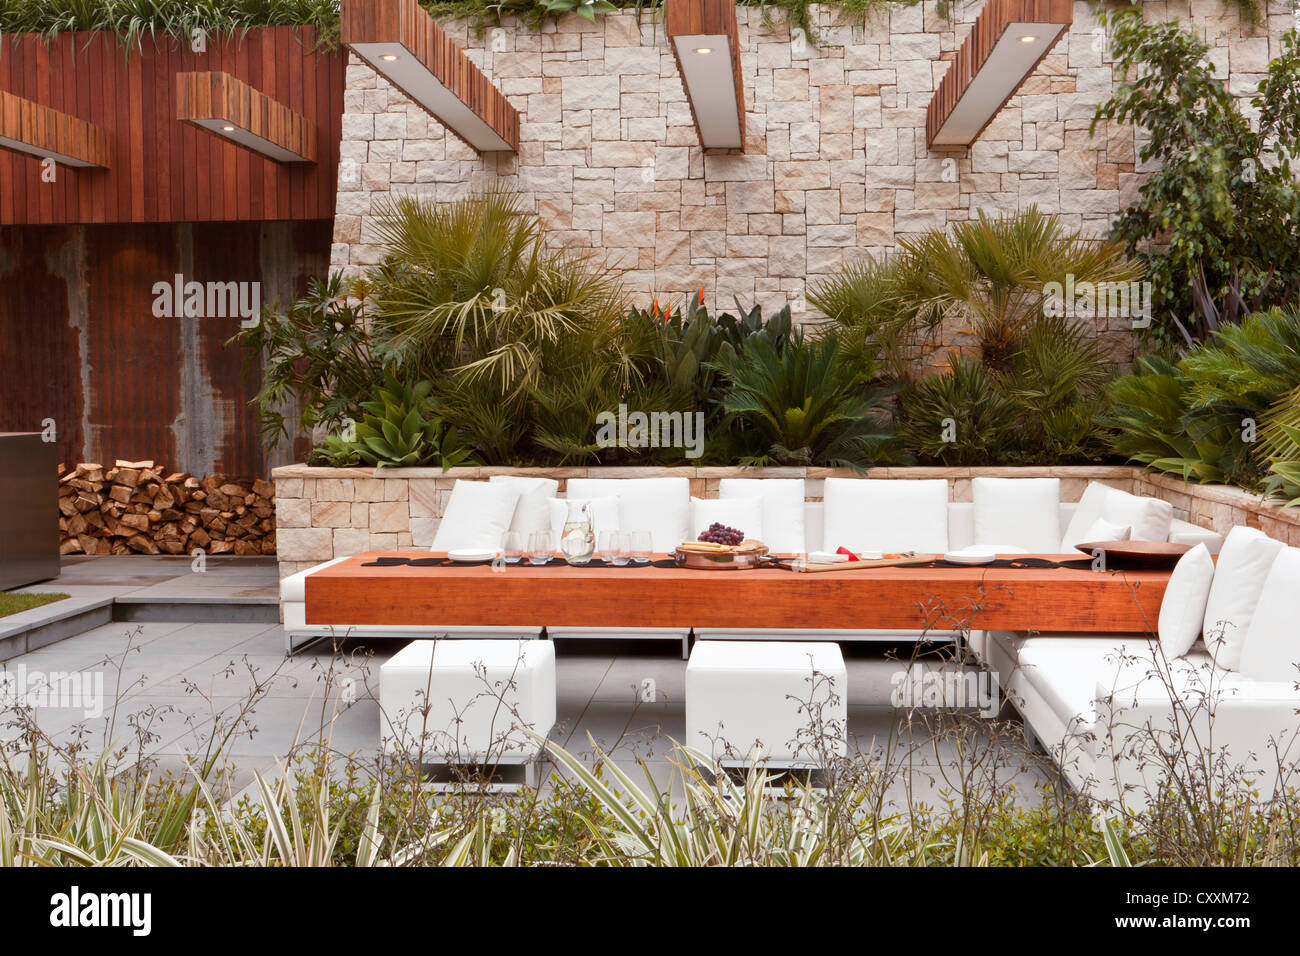 Urban modern contemporary garden with outside outdoor garden furniture sofa seating area stone paving paved patio Chelsea flower show gardens UK Stock Photo